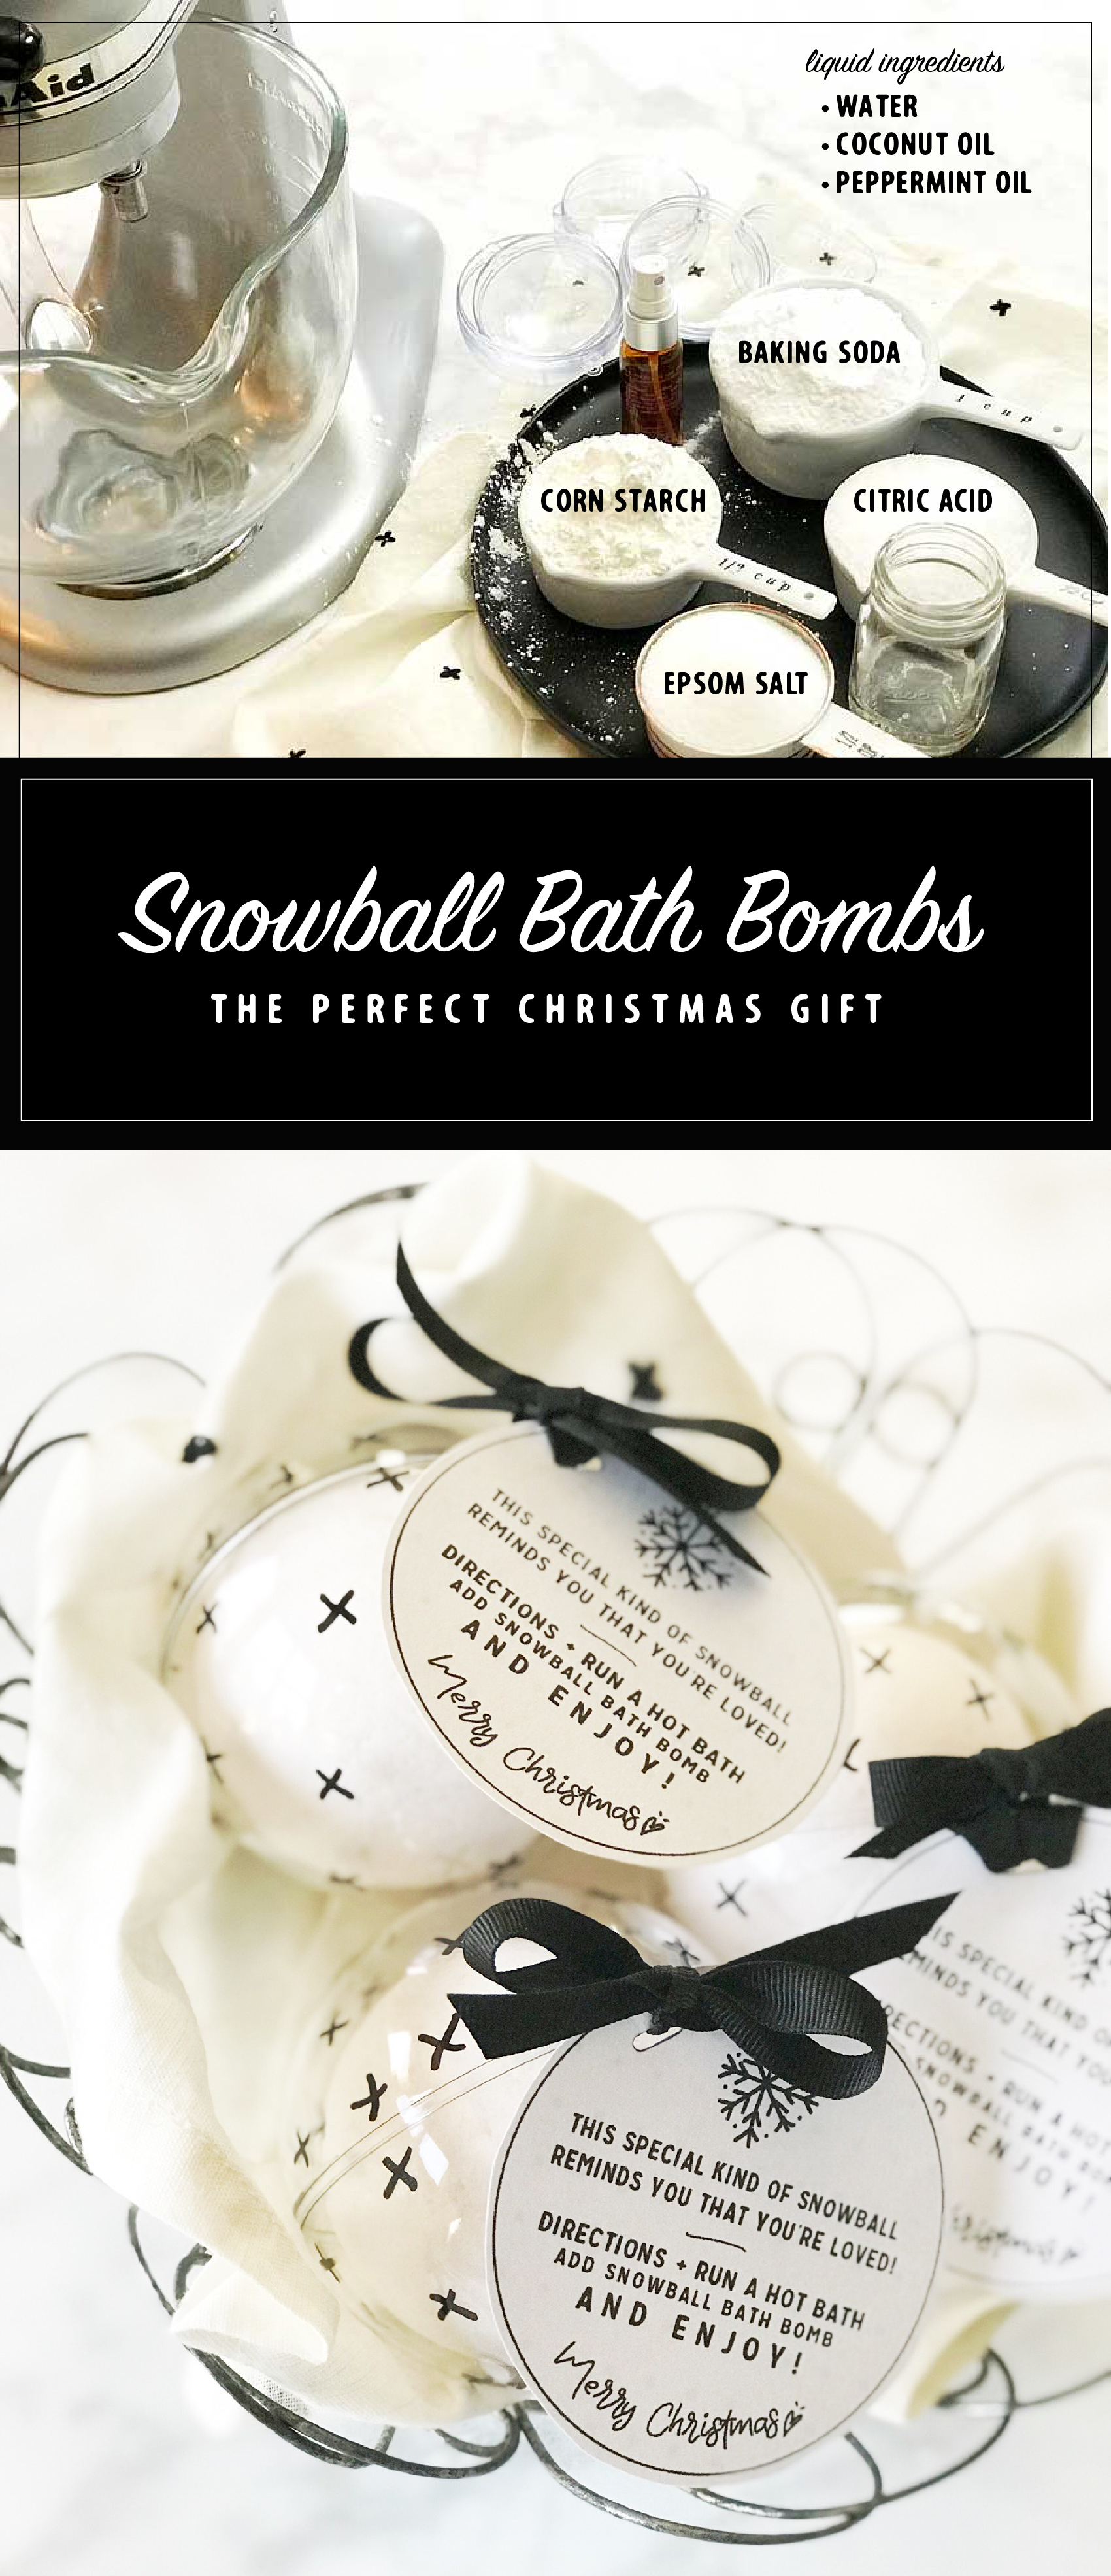 SNOWBALL BATH BOMBS Looking for a simple Christmas gift for friends and neighbors? This simple to make snowball bath bomb will quickly become your favorite gift to give this holiday season!